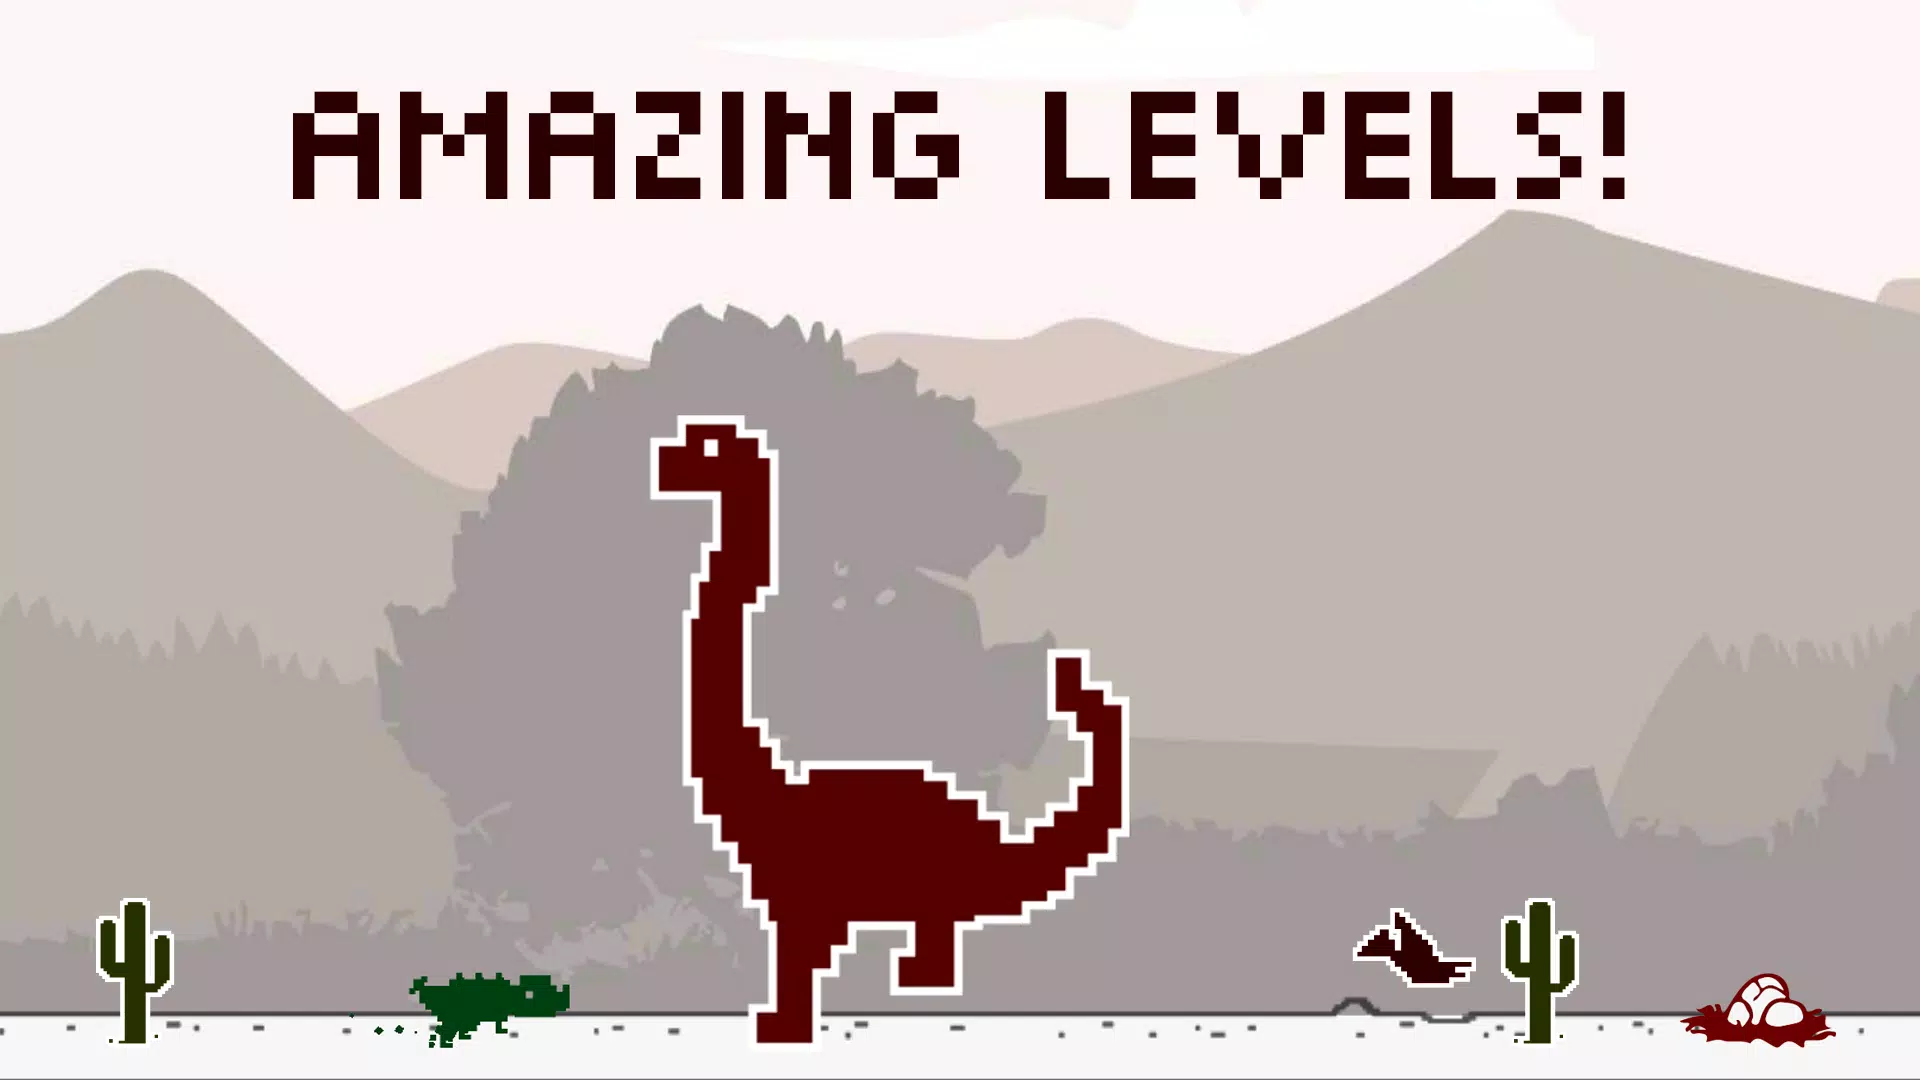 Downloads Dino T-Rex RTX Android